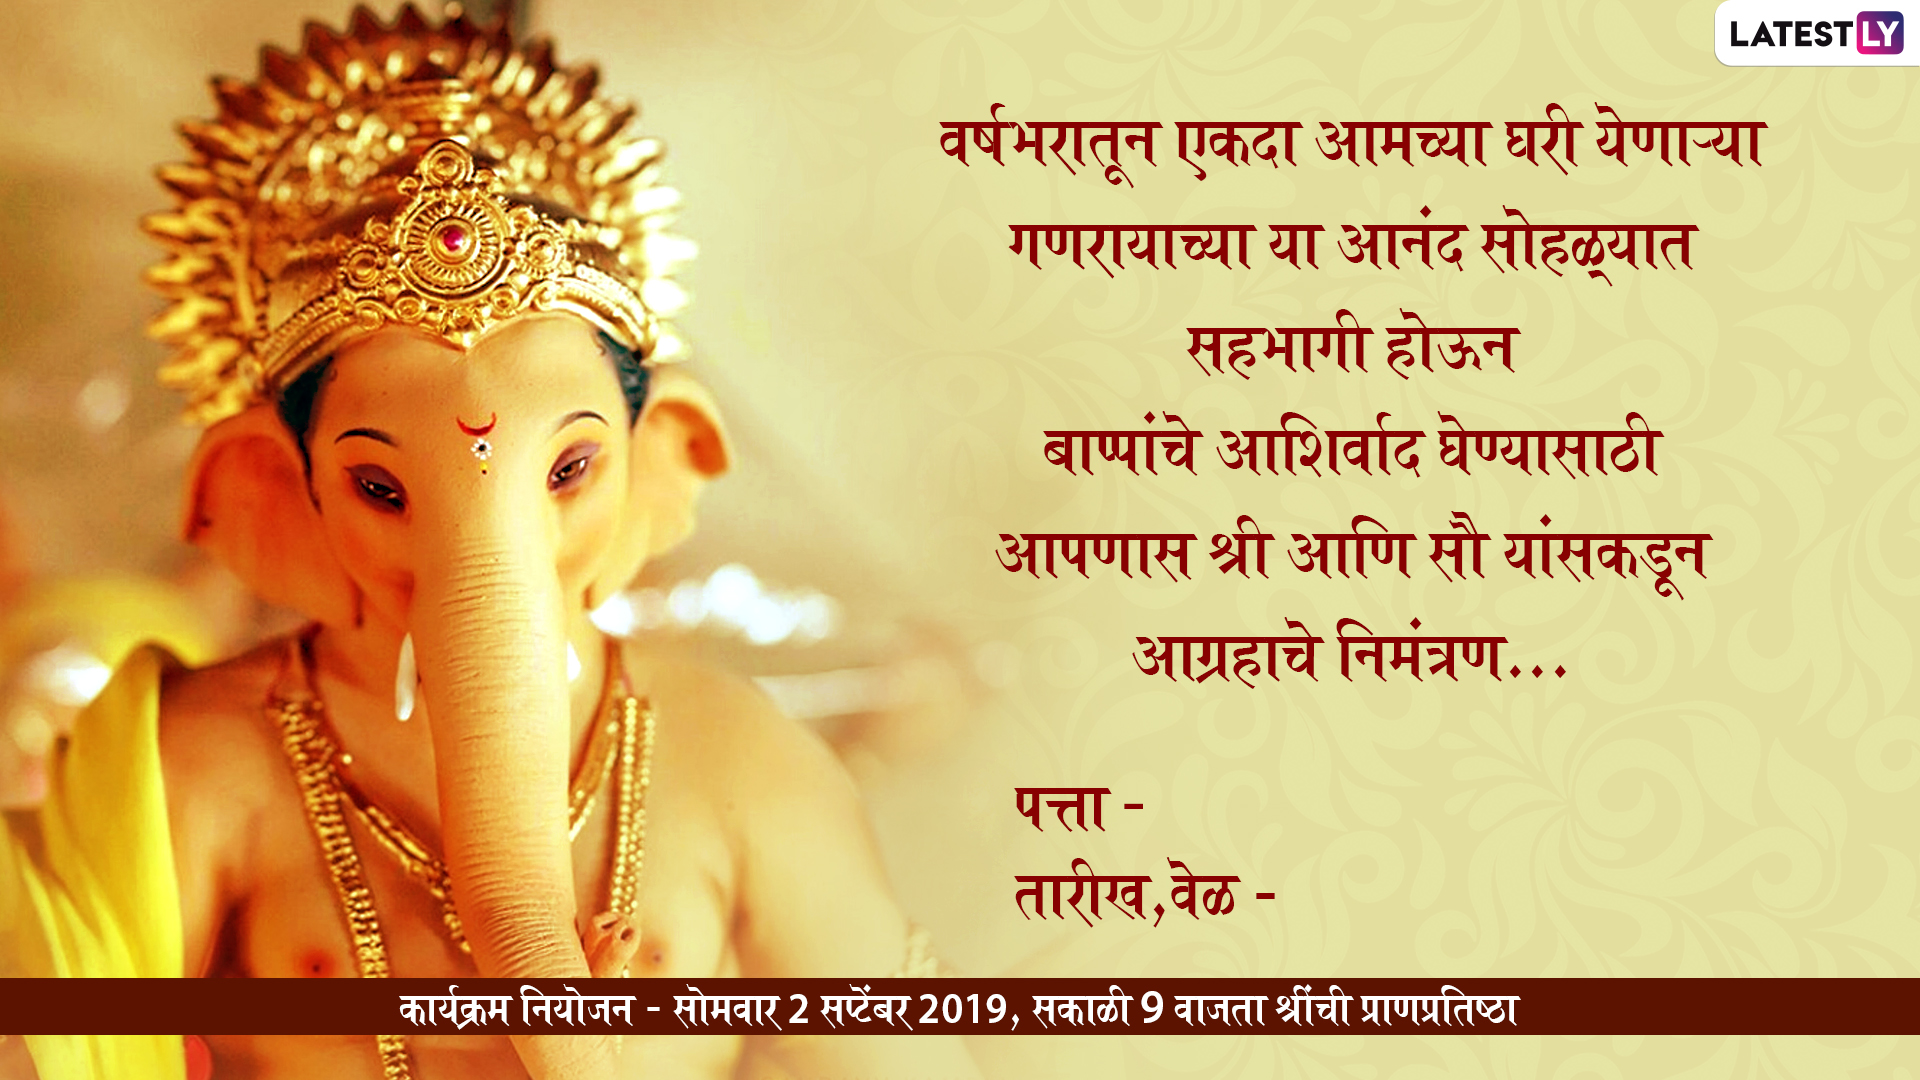 Ganesh Chaturthi 2019 Invitation Card Format With Messages In Marathi Whatsapp Status And Images To Invite Friends And Family For Ganpati Darshan Latestly Simply, choose from hundreds of amazing layouts in canva & customize as much as you want. ganesh chaturthi 2019 invitation card